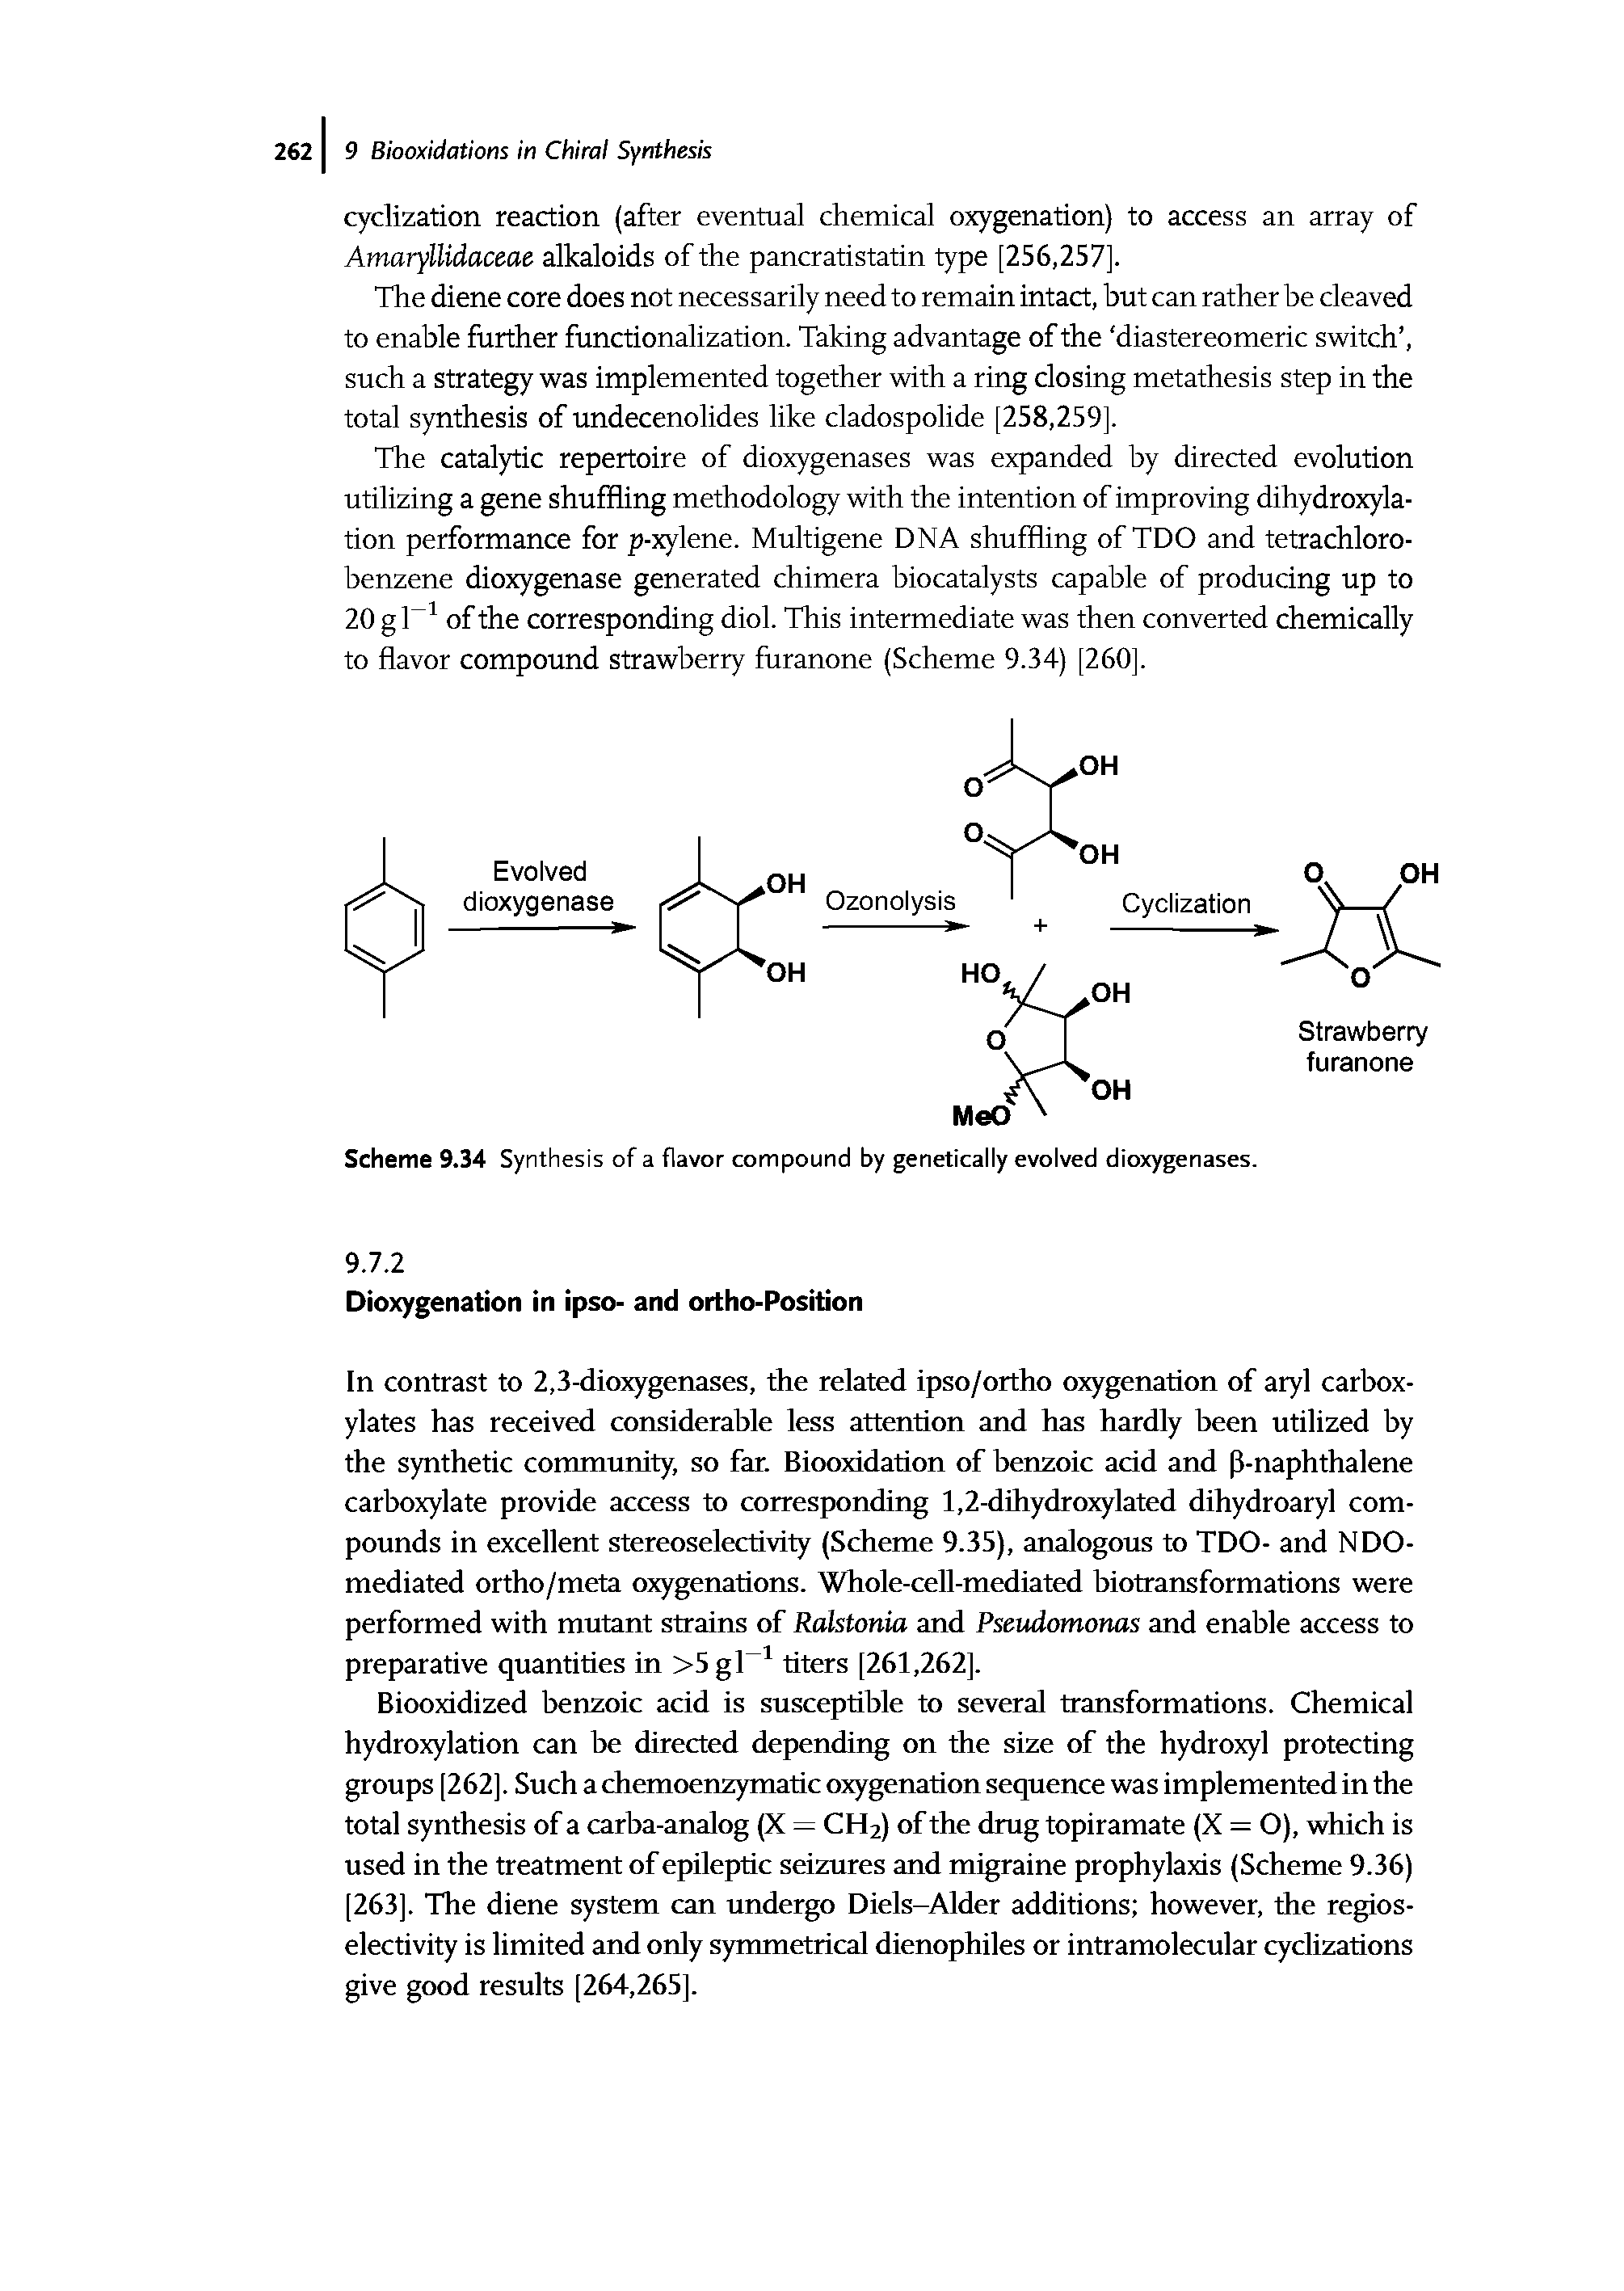 Scheme 9.34 Synthesis of a flavor compound by genetically evolved dioxygenases.